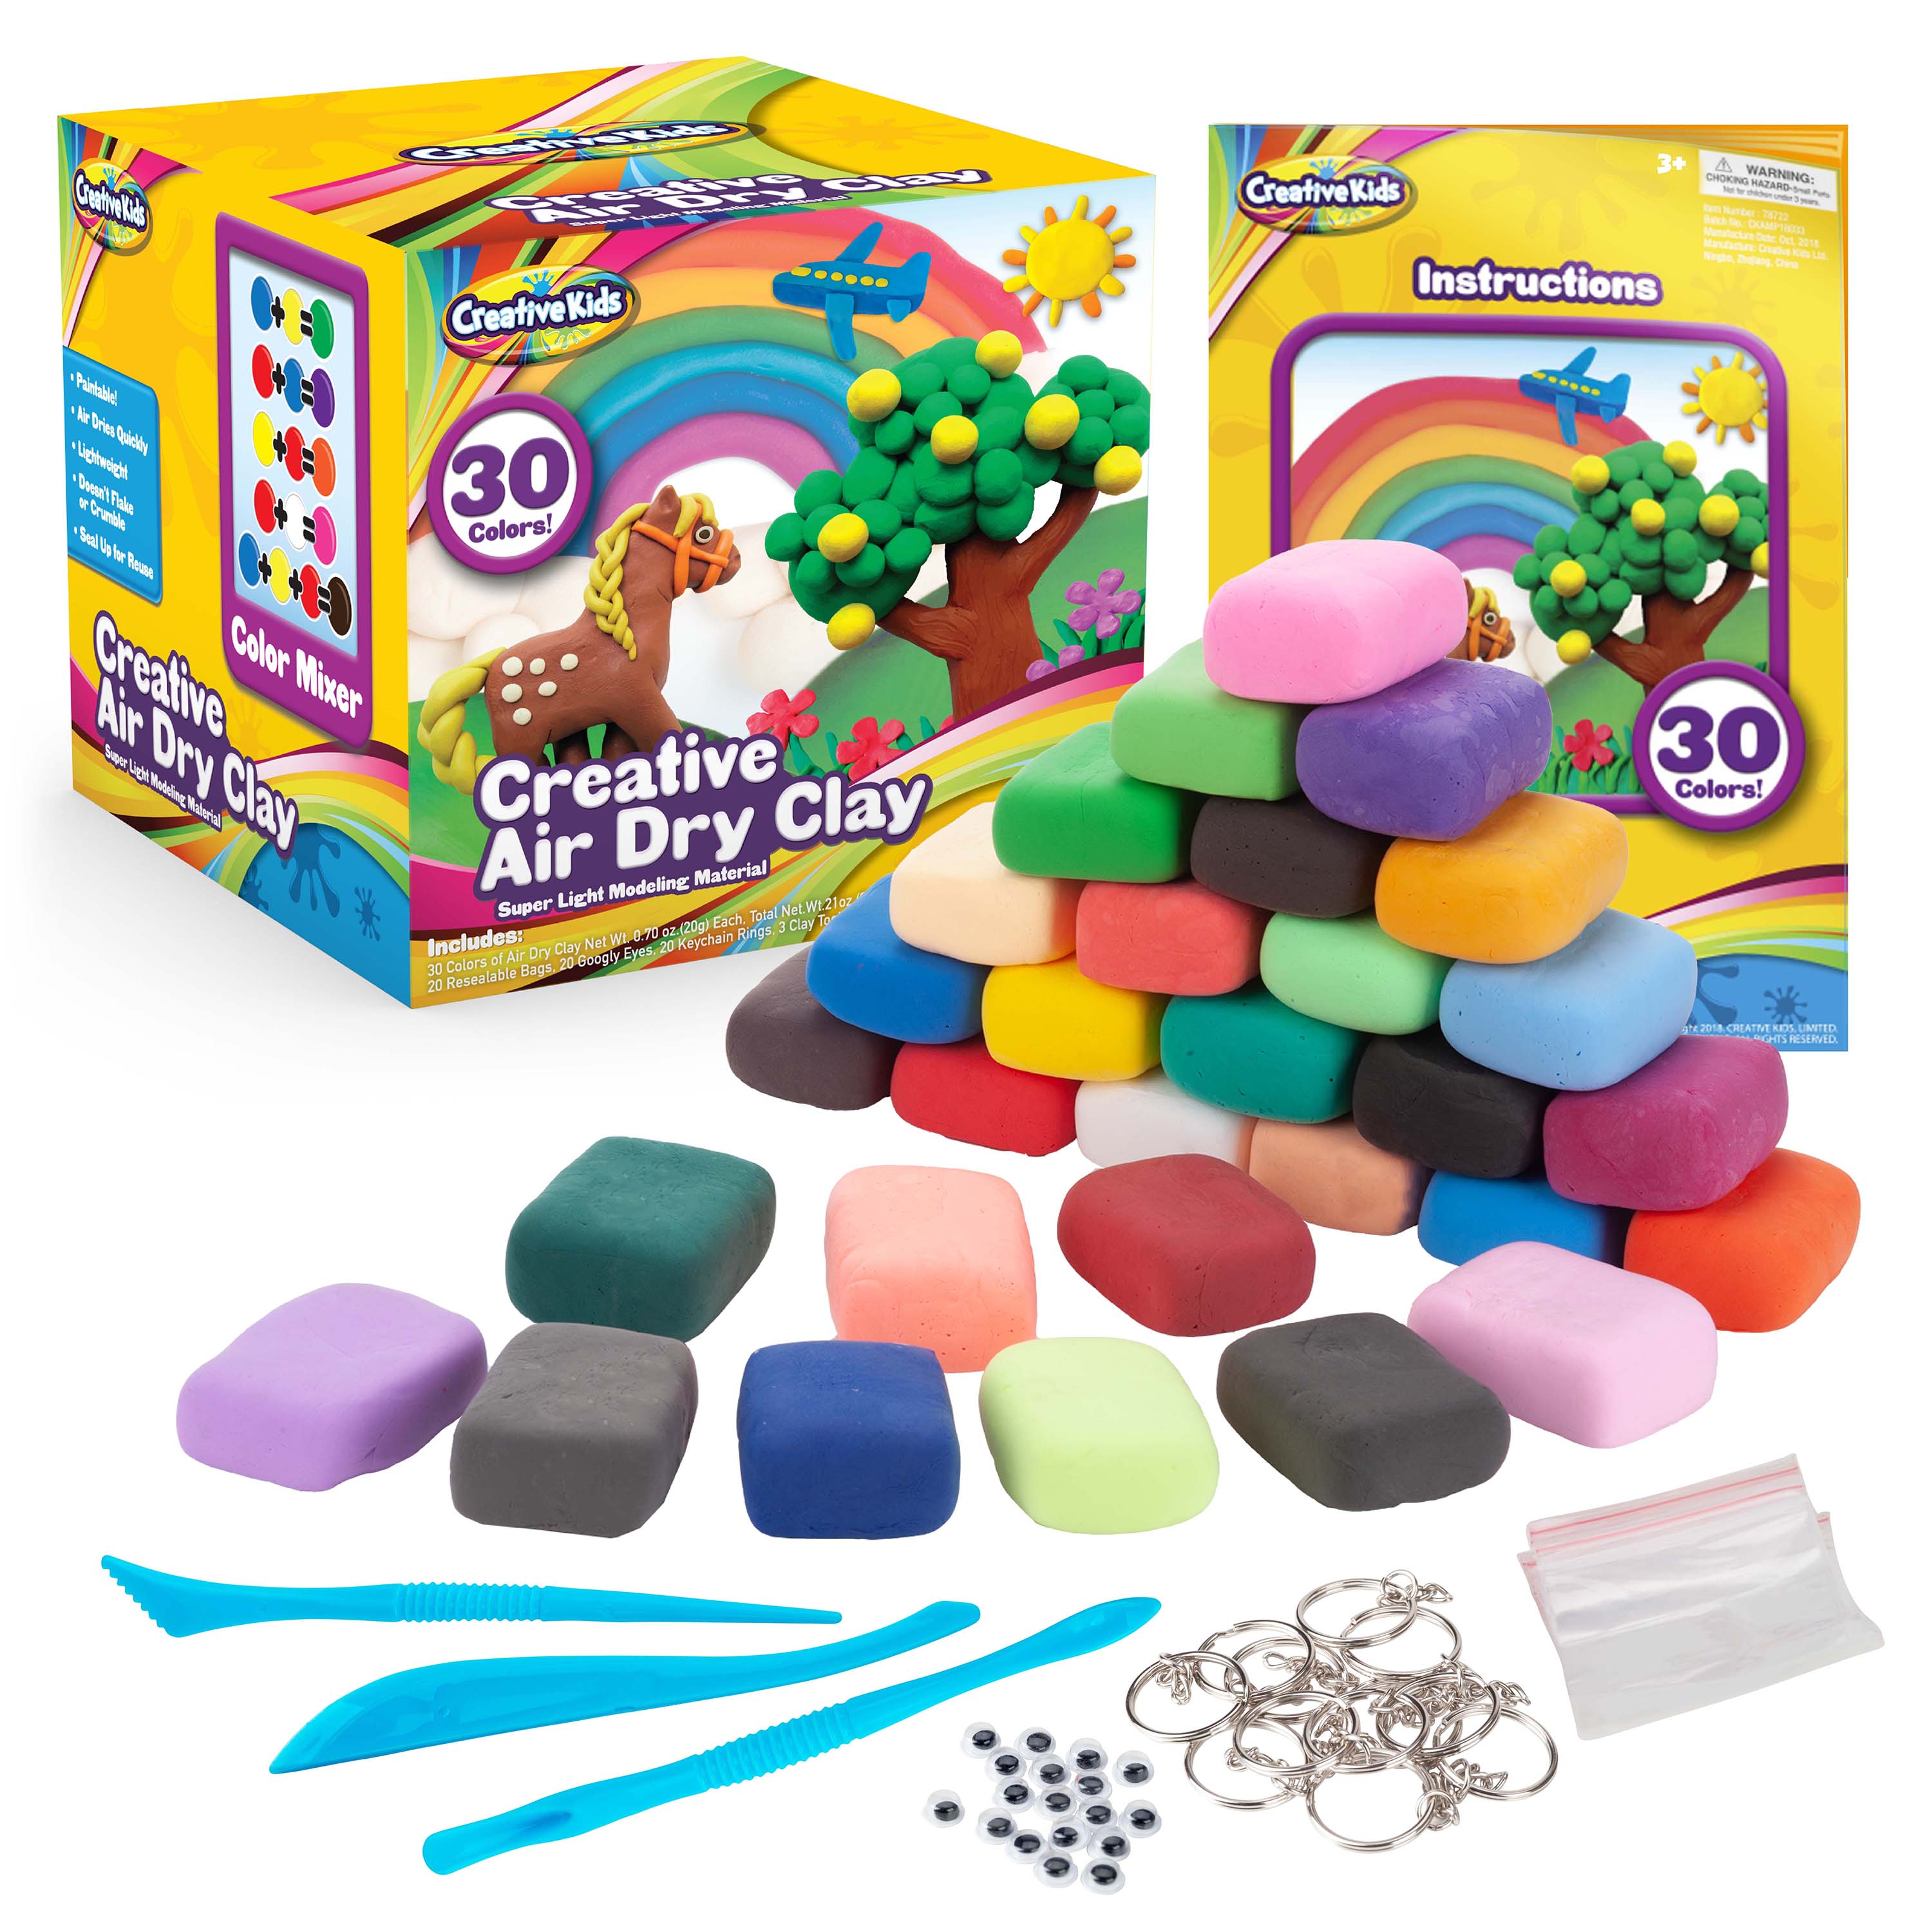 https://www.momjunction.com/wp-content/uploads/product-images/creative-kids-air-dry-clay-modeling-crafts-kit_afl476.jpg